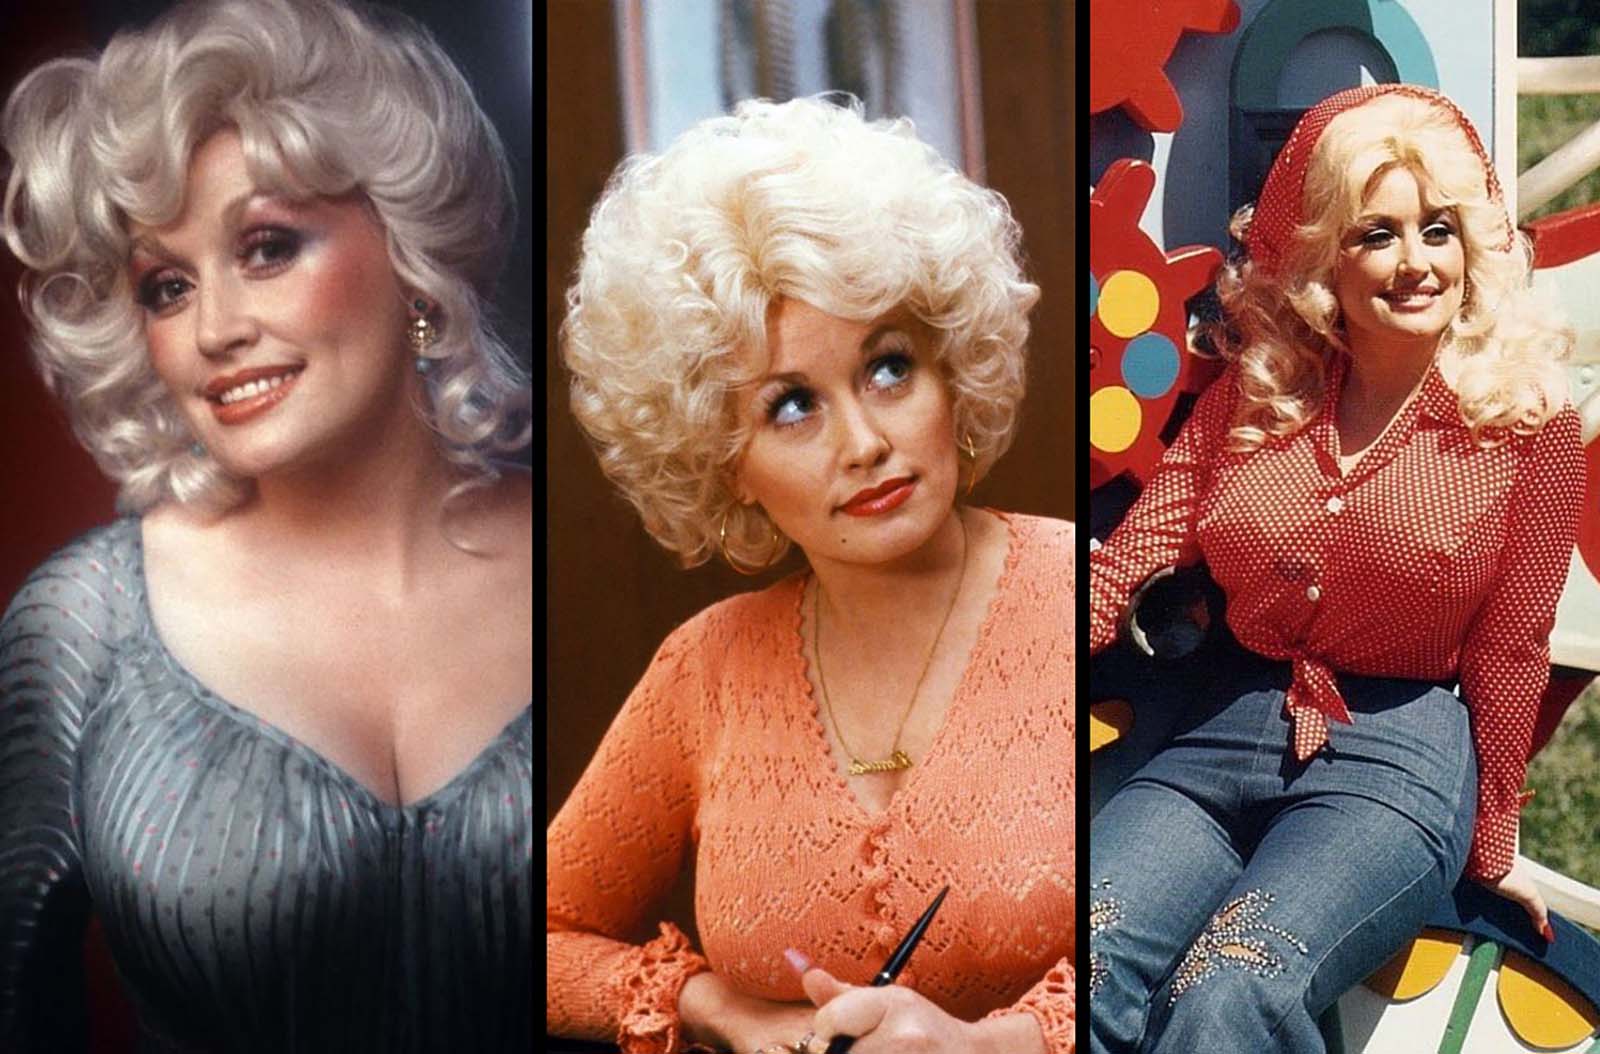 Nude pictures of dolly parton